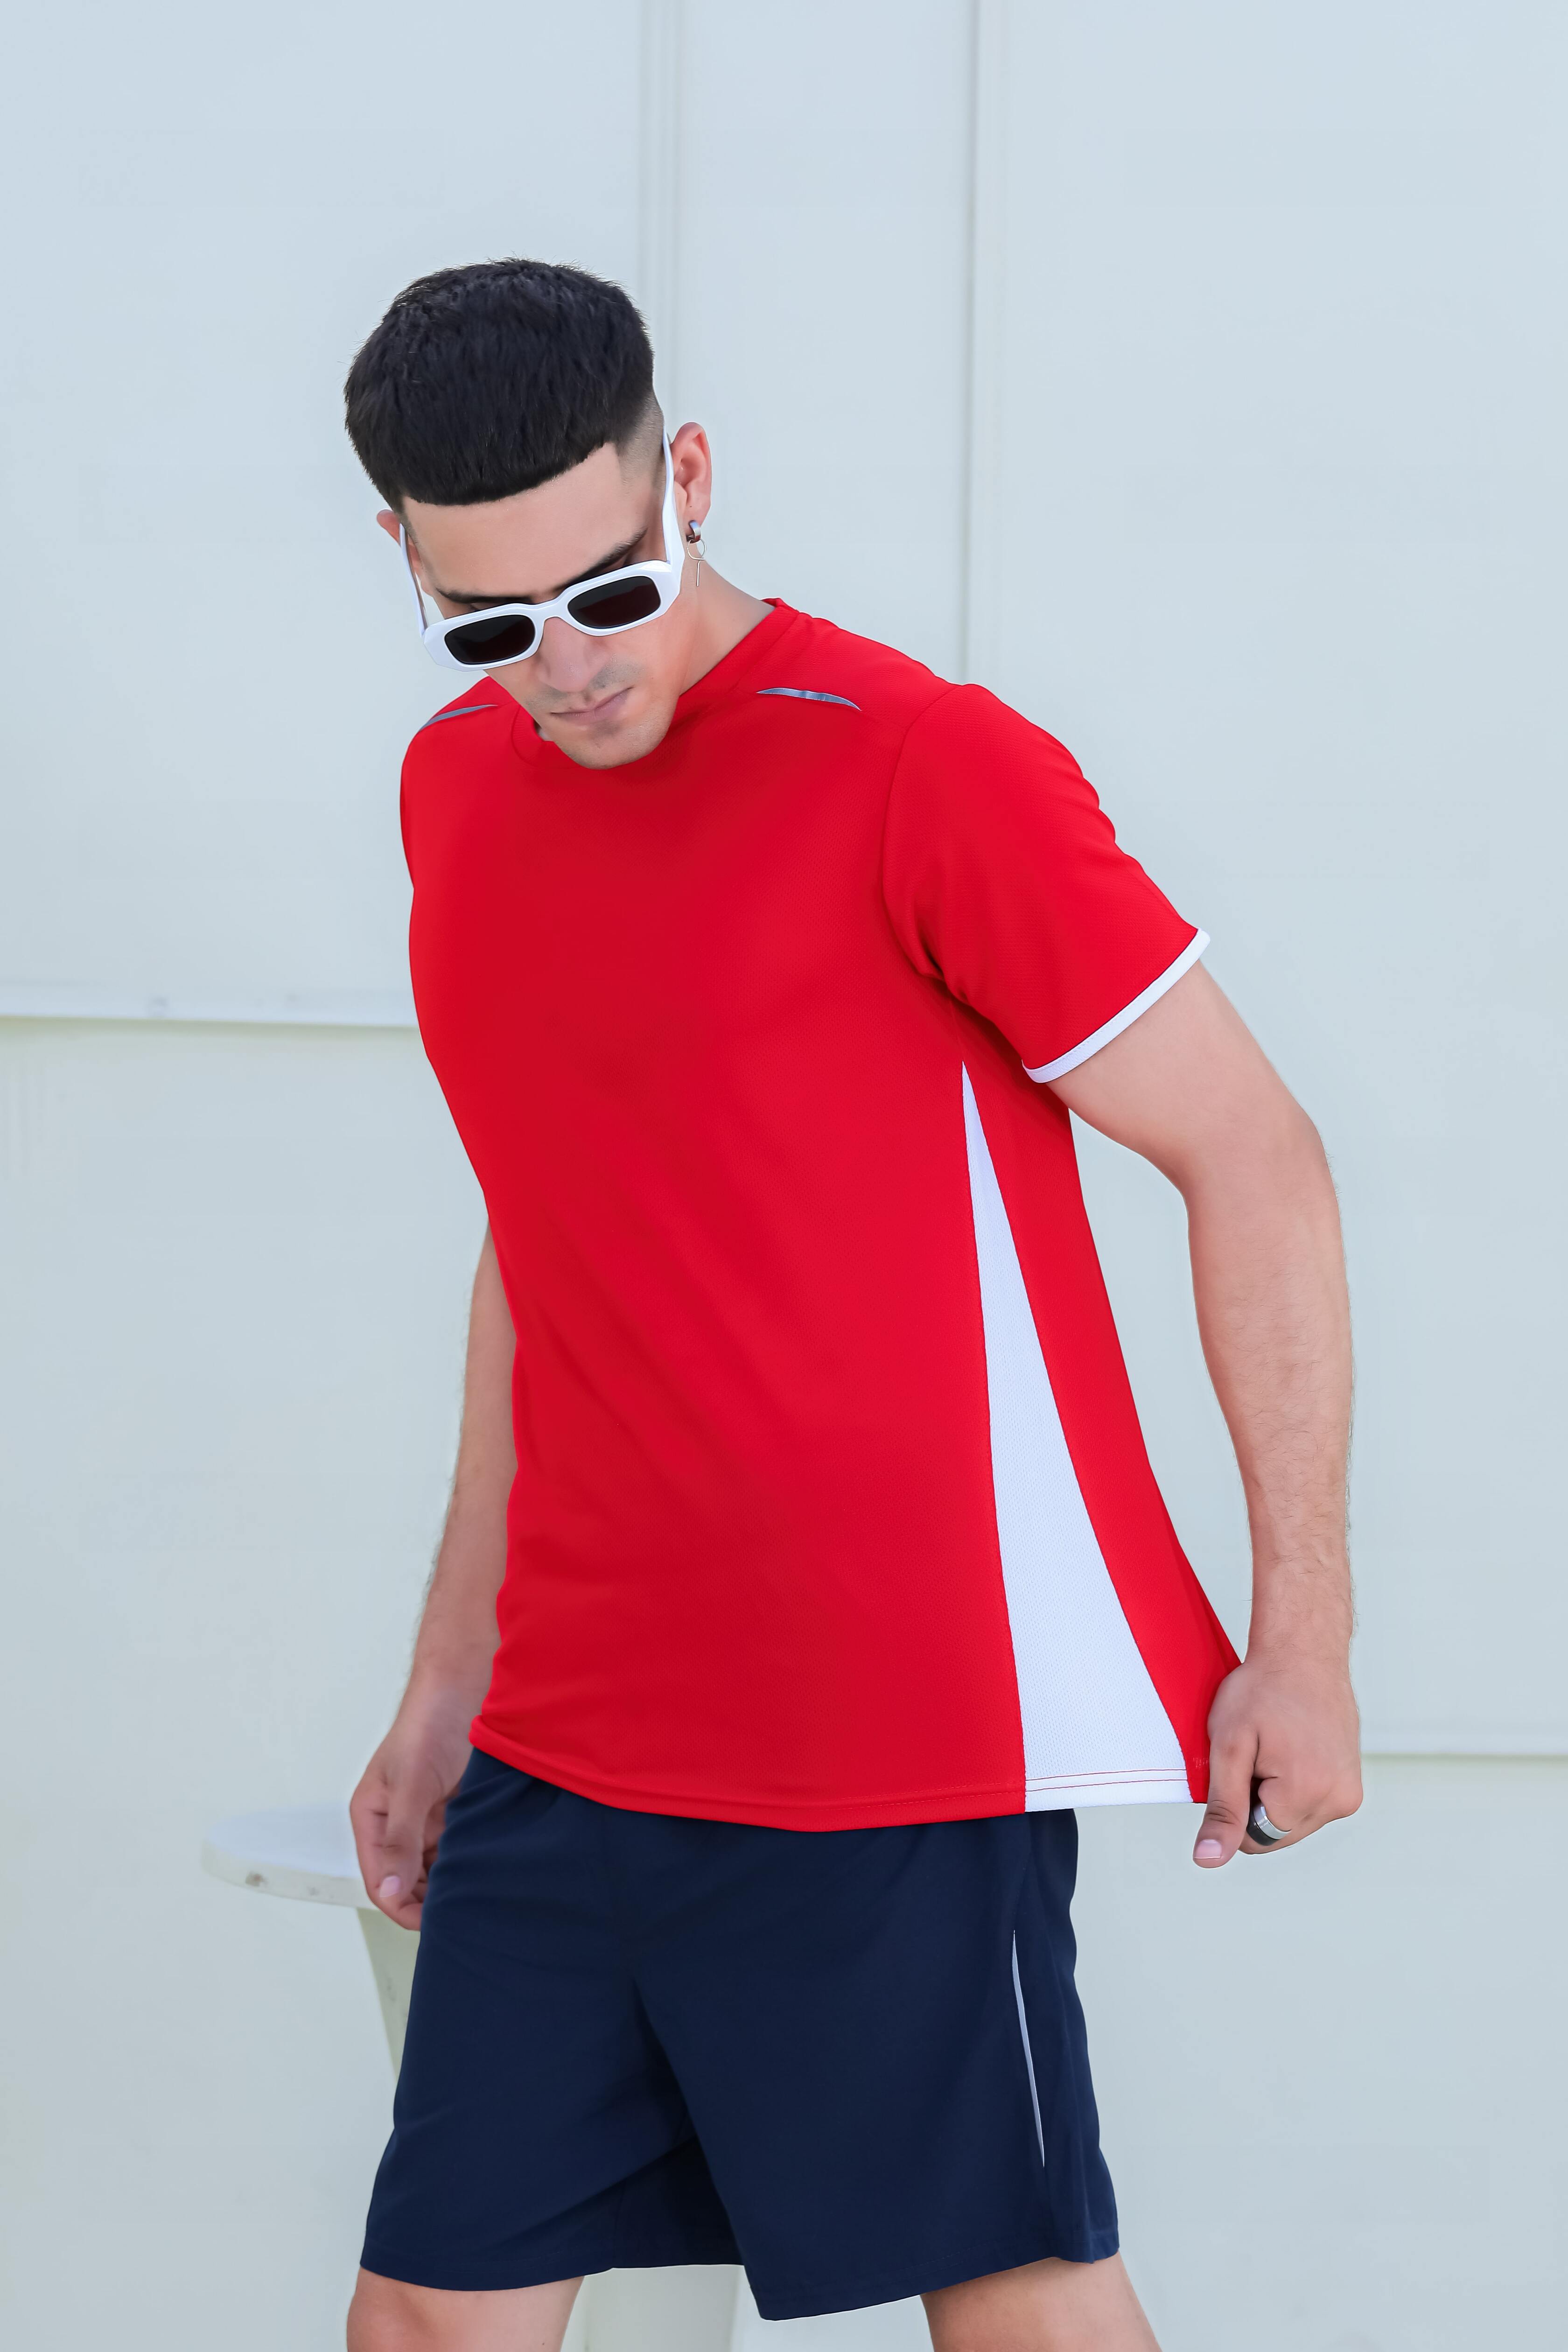 Banner Round Neck Dry-fit Tees for Men-MTST-0066-Red White